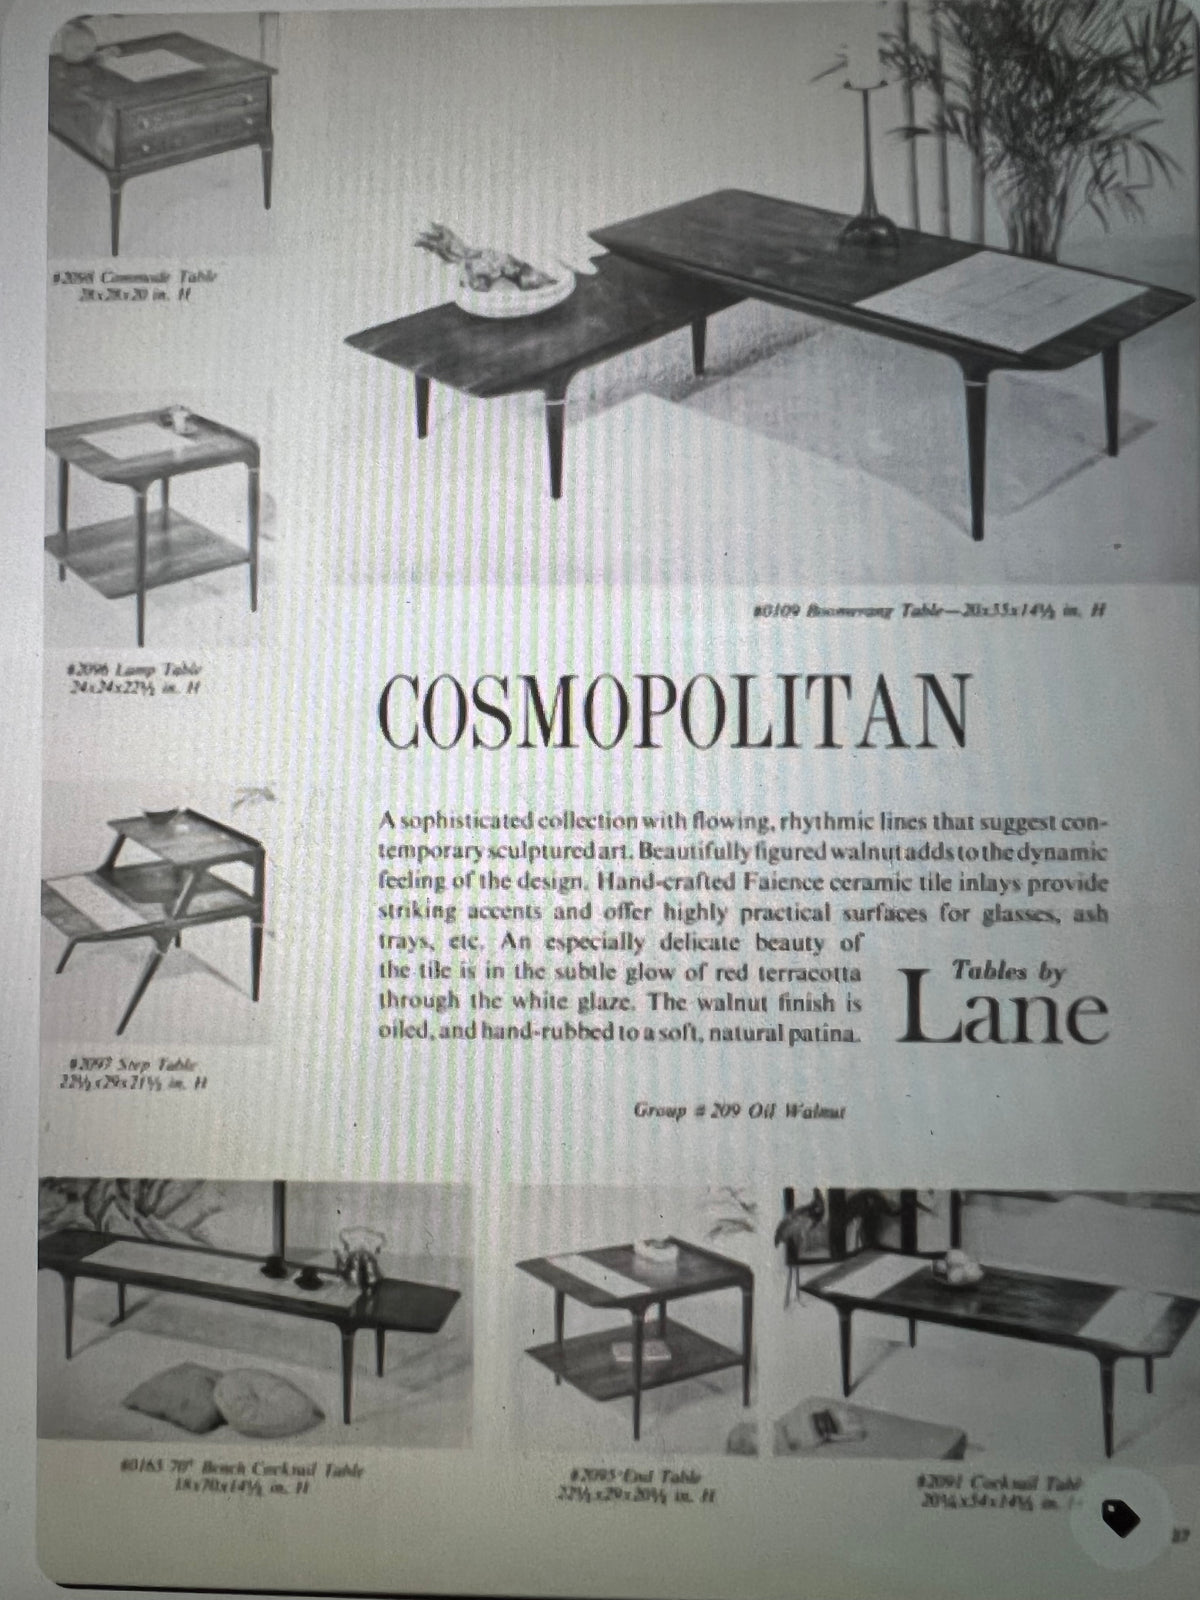 Mid-Century Lane Cosmopolitan Switchblade Coffee Table with Tile Inserts Chicago, IL